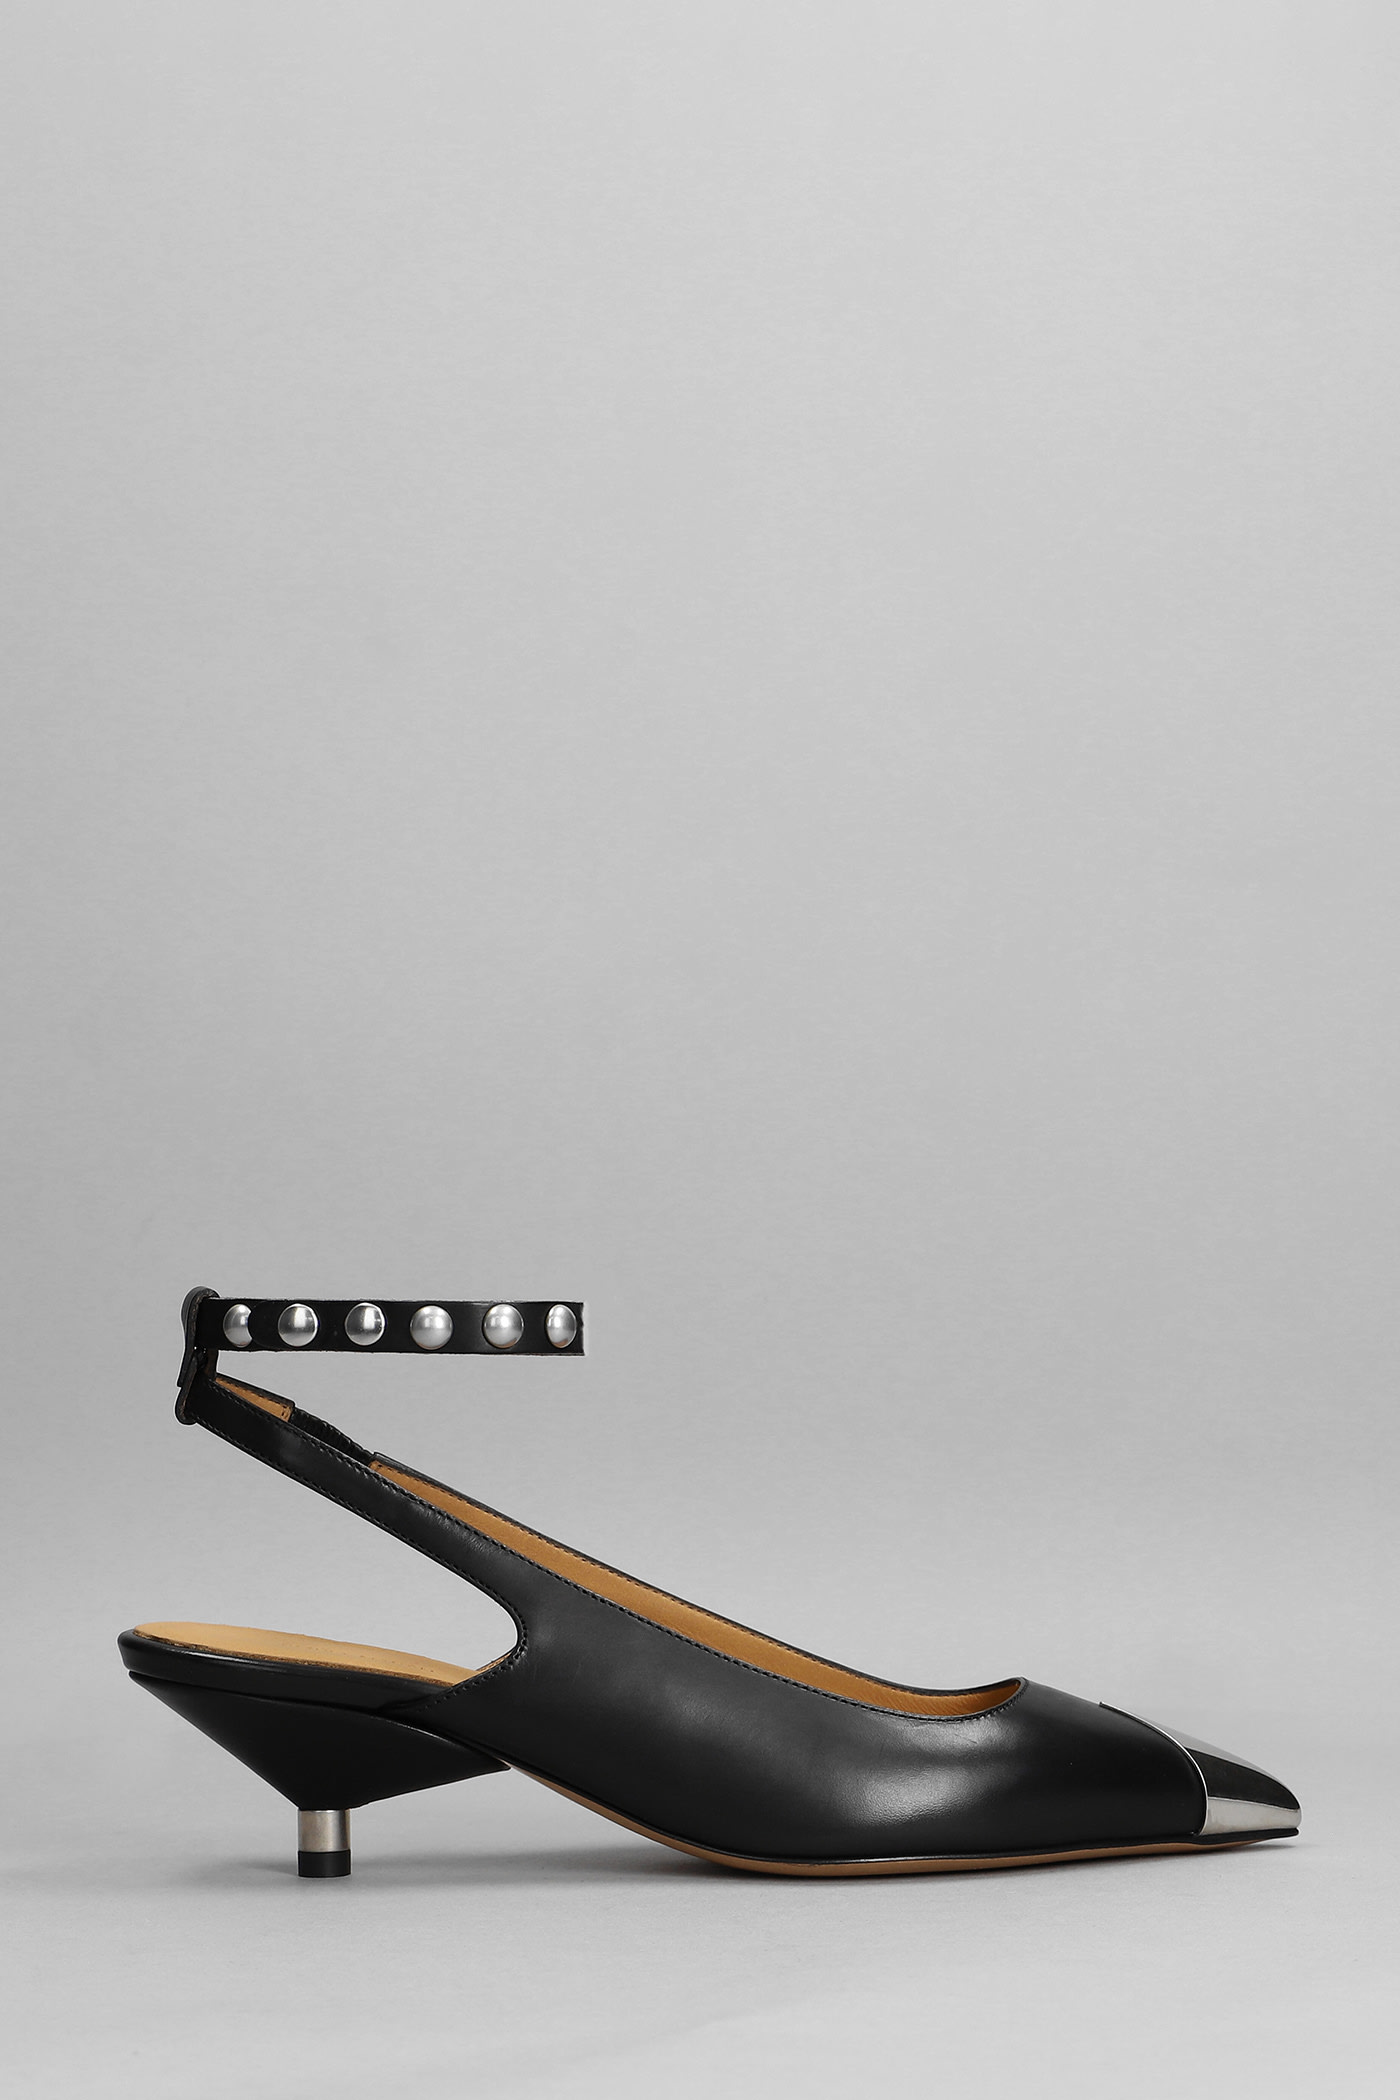 Isabel Marant Peeny Pumps Pumps In Black Leather